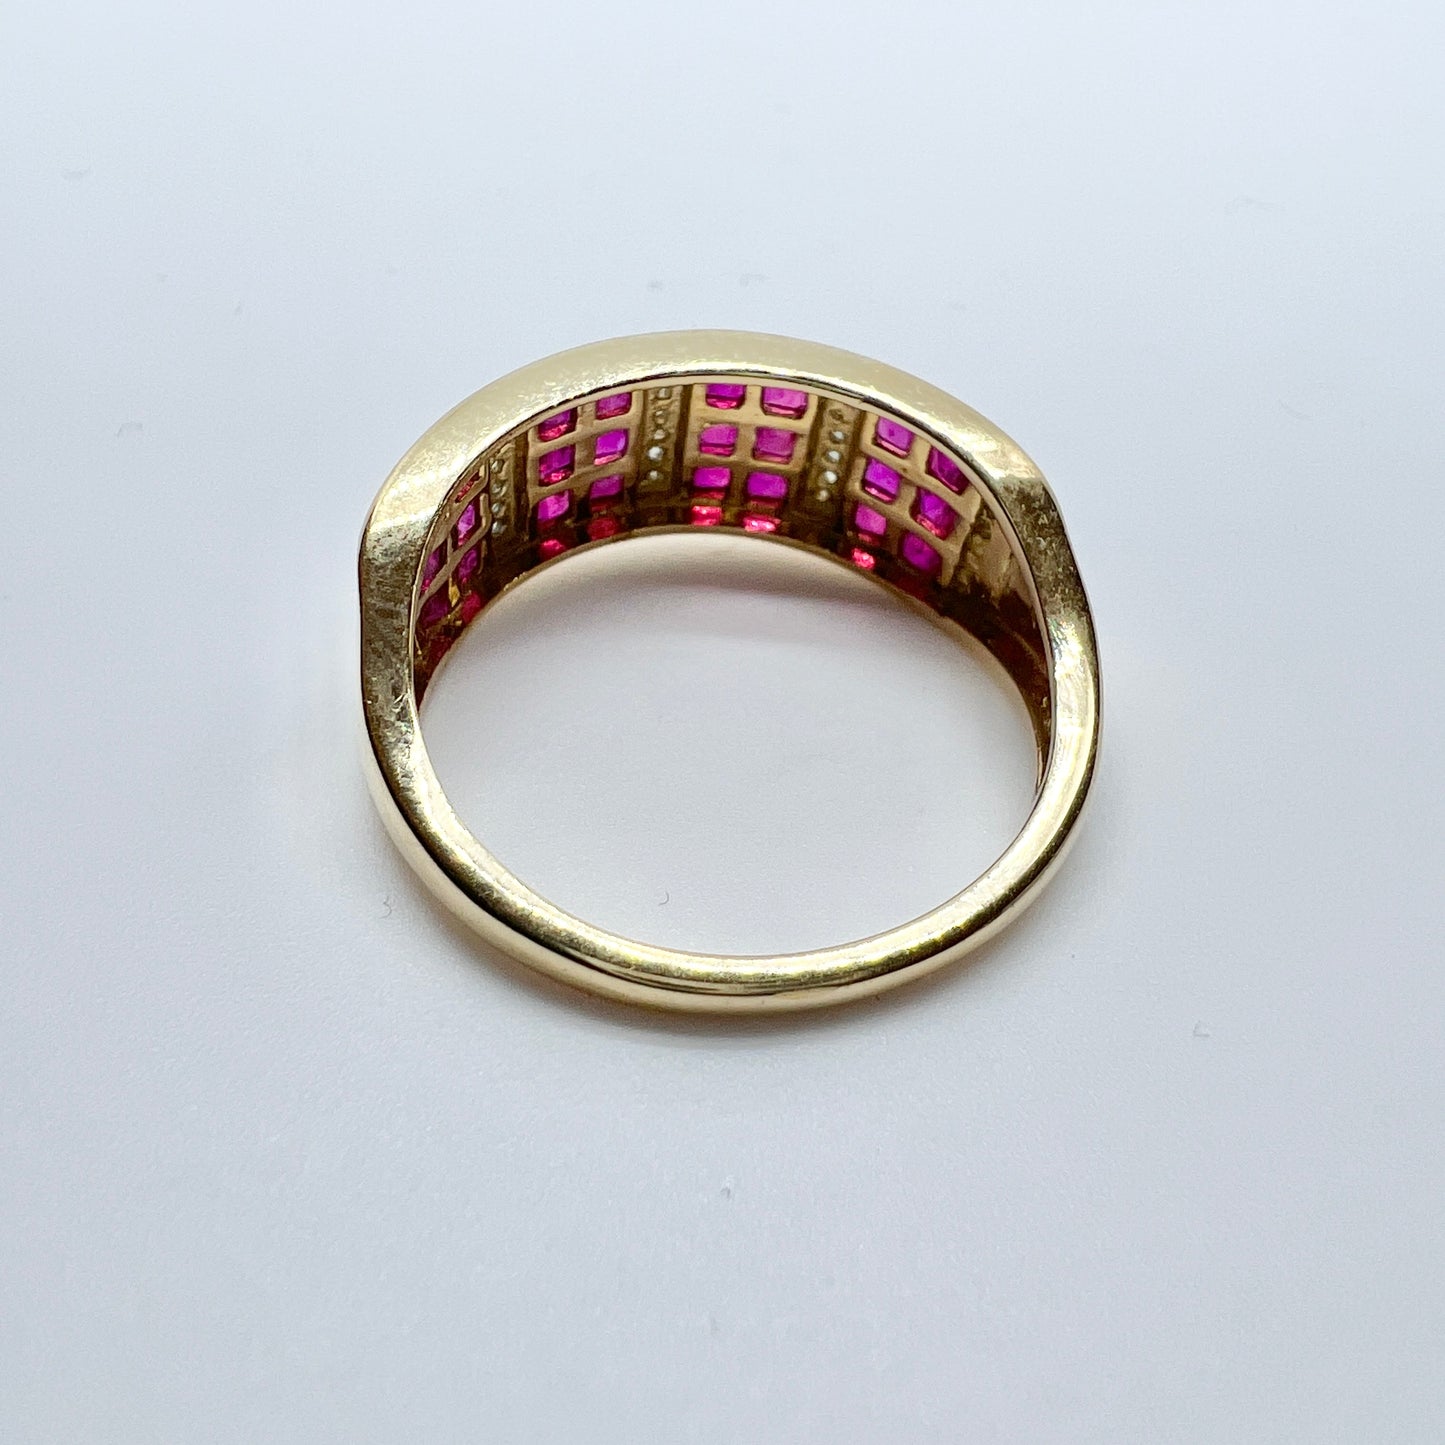 Vintage 14k Gold Diamond Synthetic Sapphire Ring.